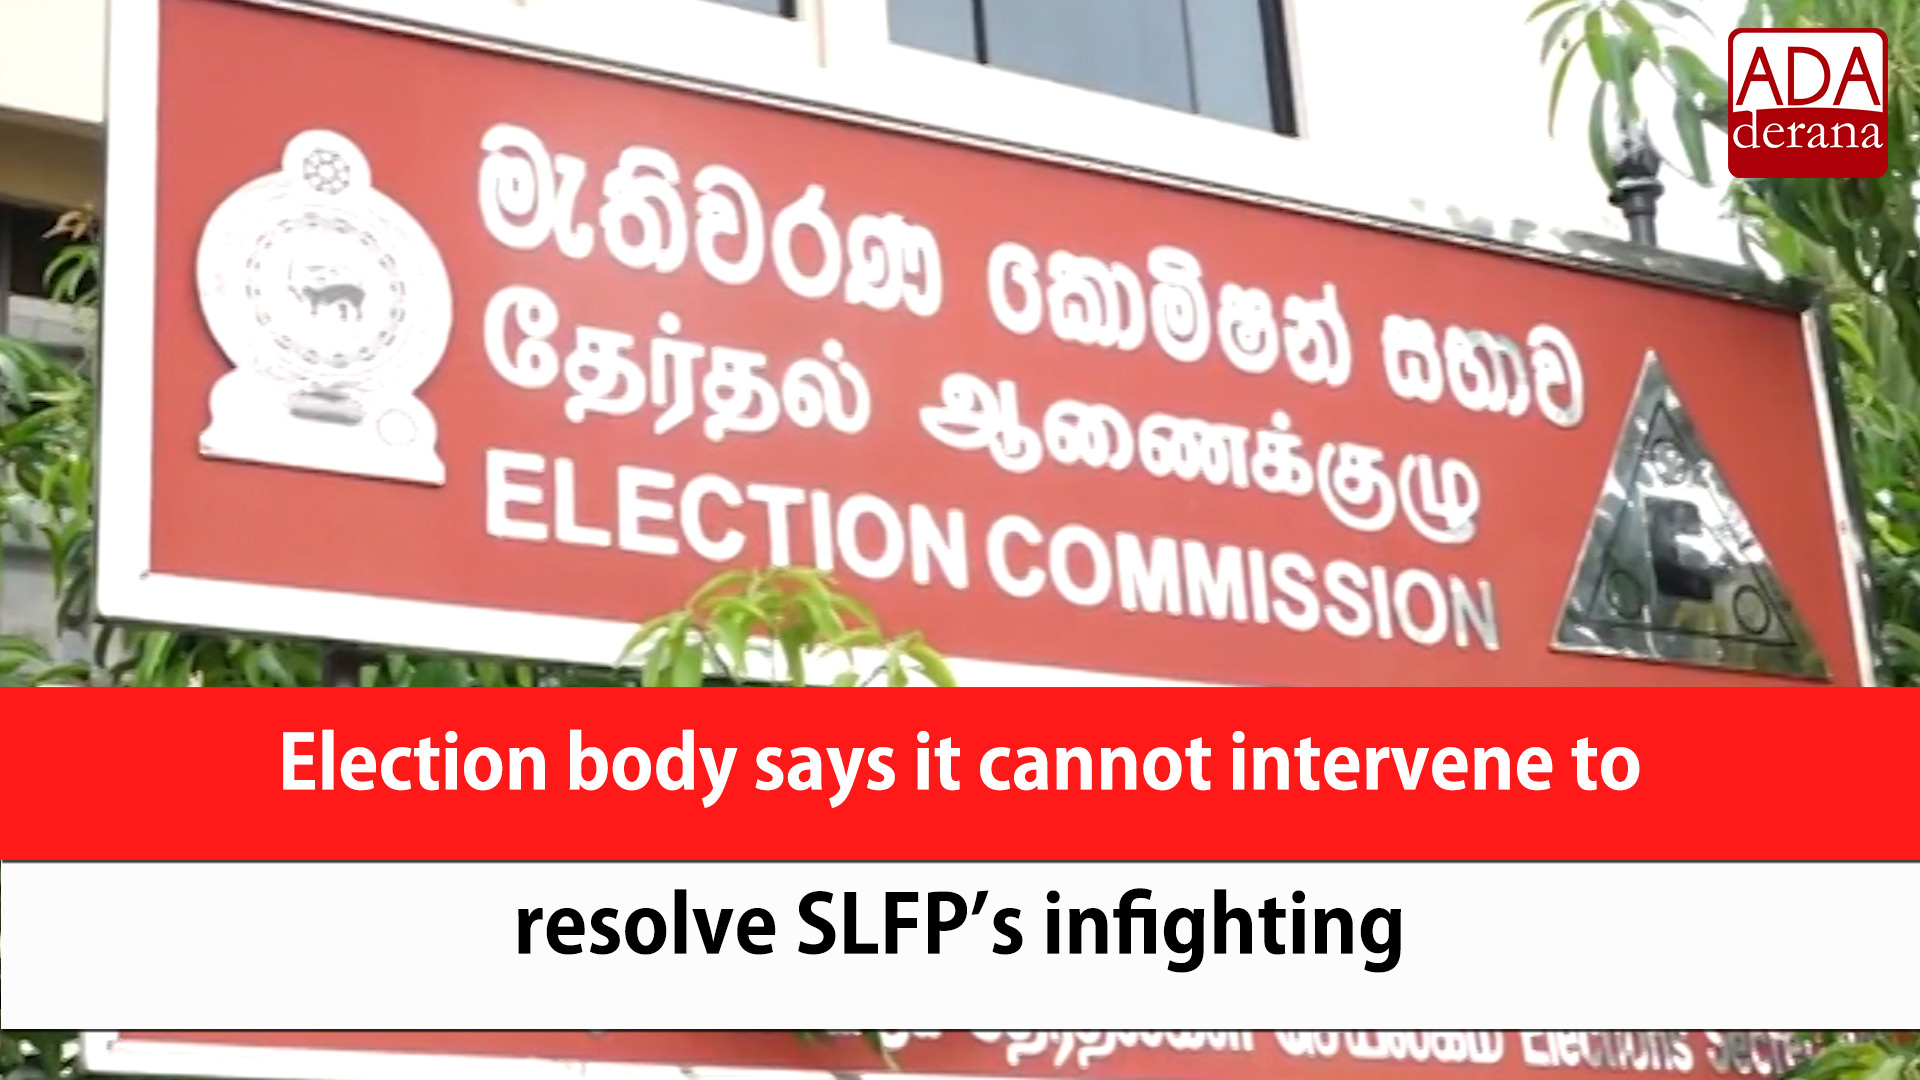 Election body says it cannot intervene to resolve SLFPs infighting (English)